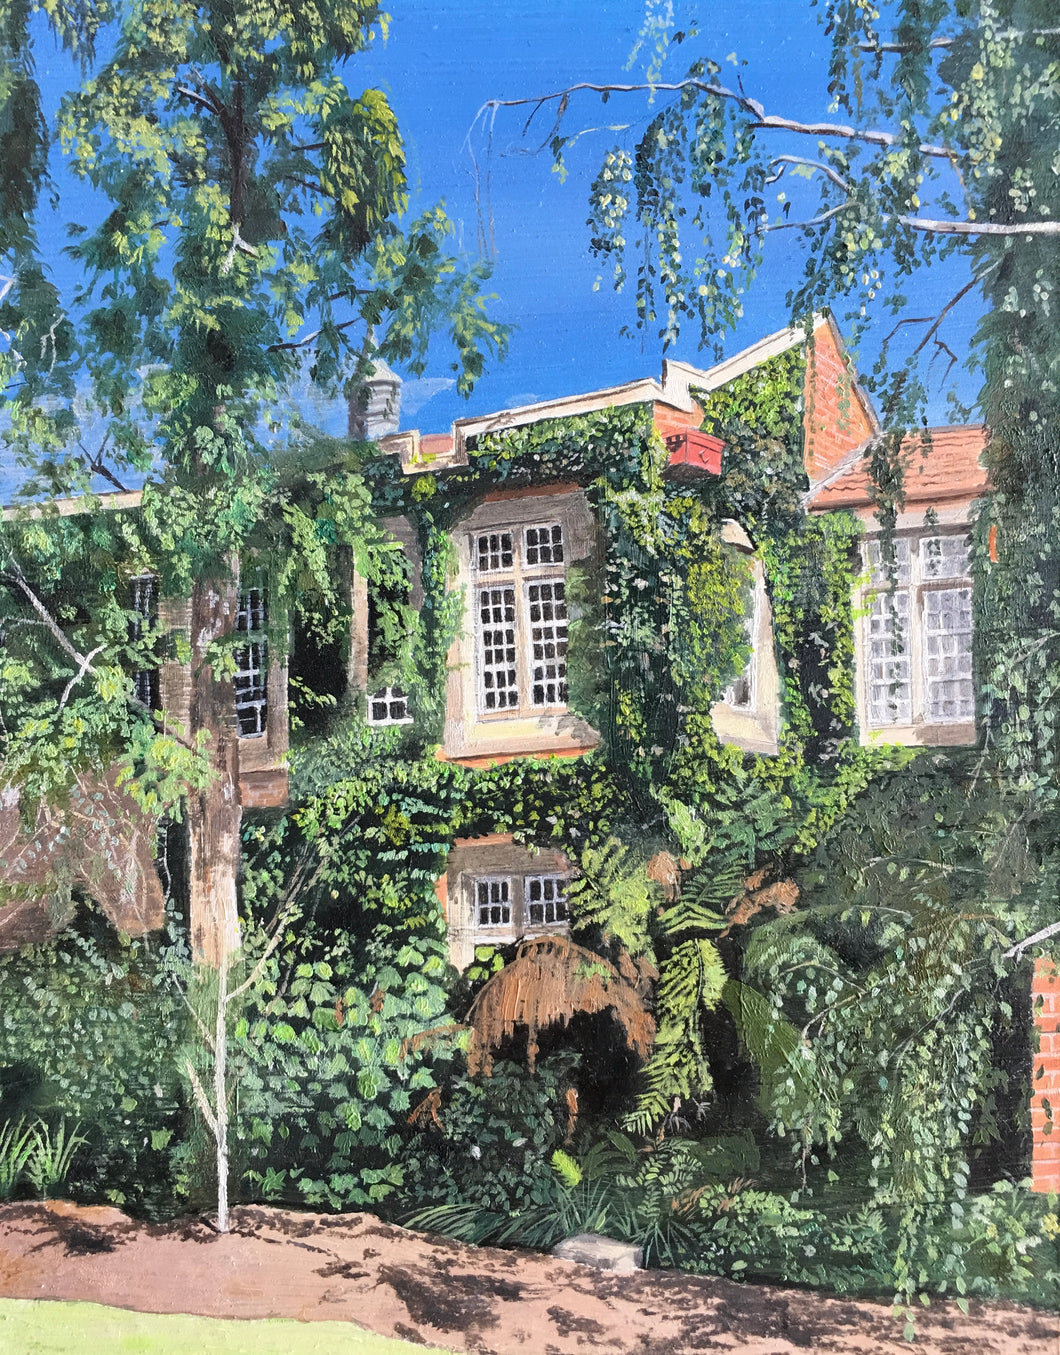 The Botany Building - Limited edition print